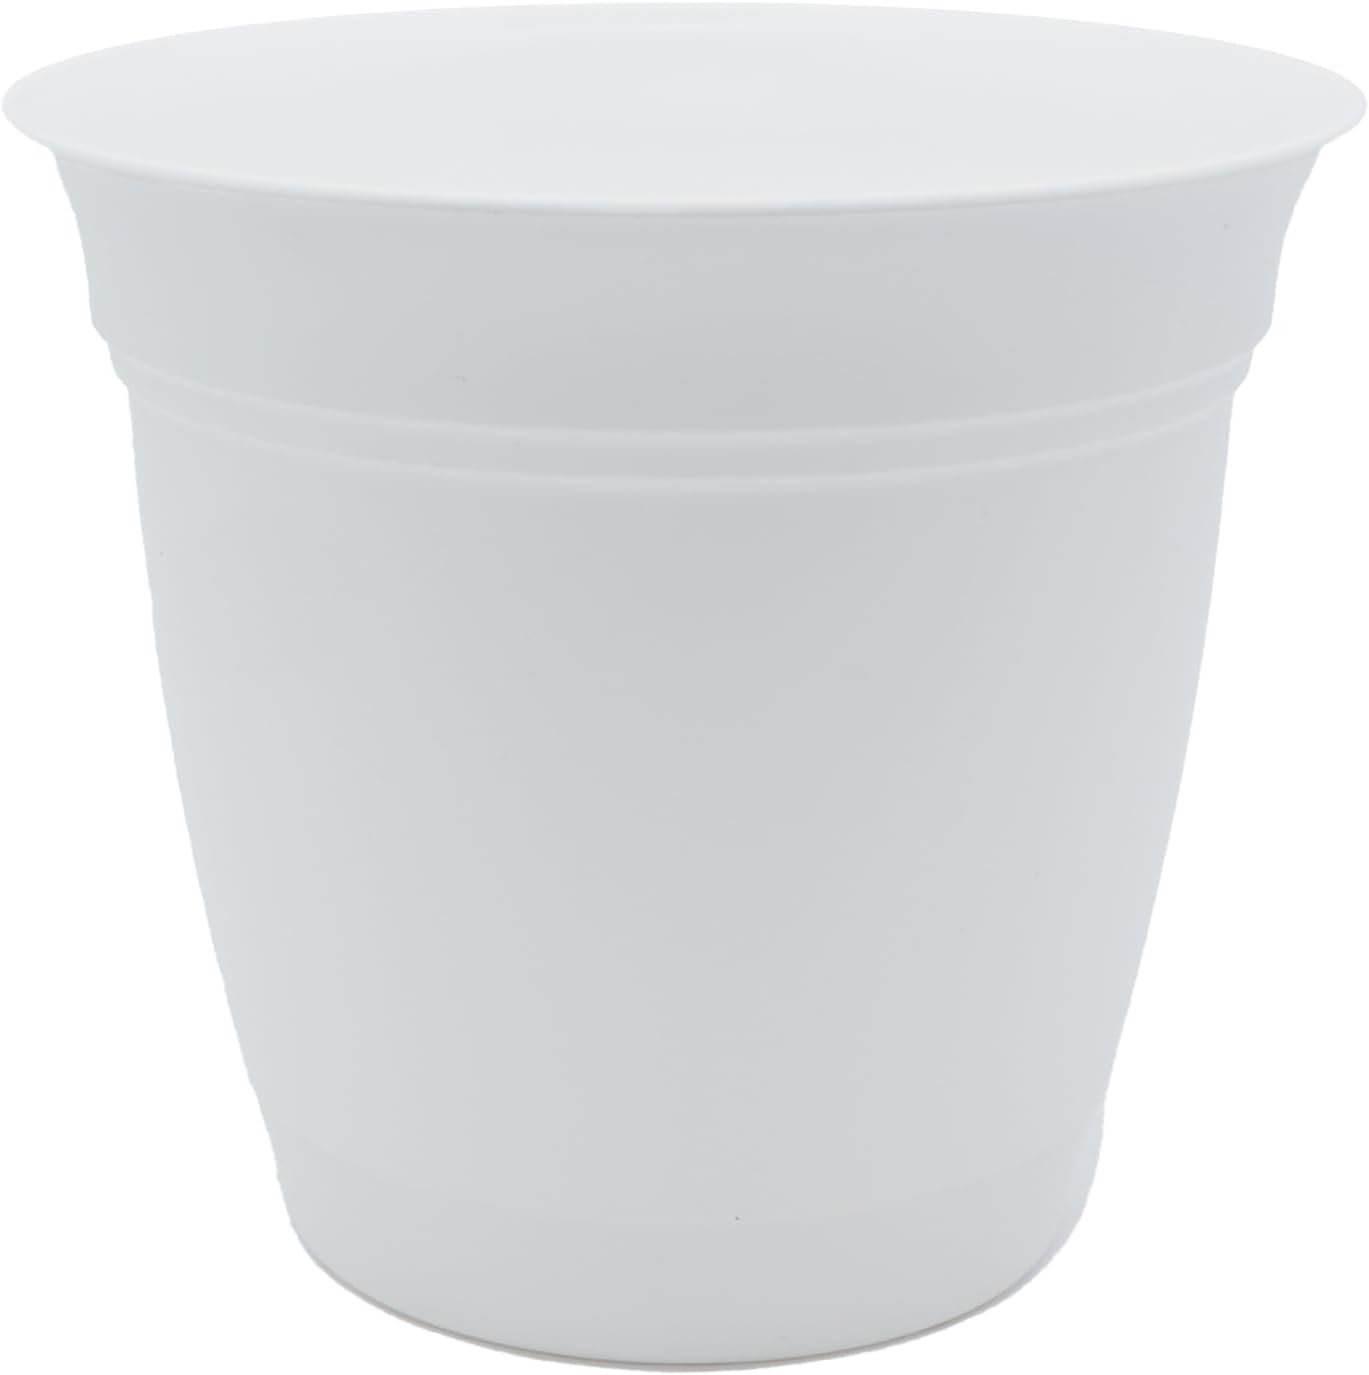 There is nothing not to like about this style flower pot. It' well made, attractive, and has a good capacity for repotting plants. I'm happy with my purchase.